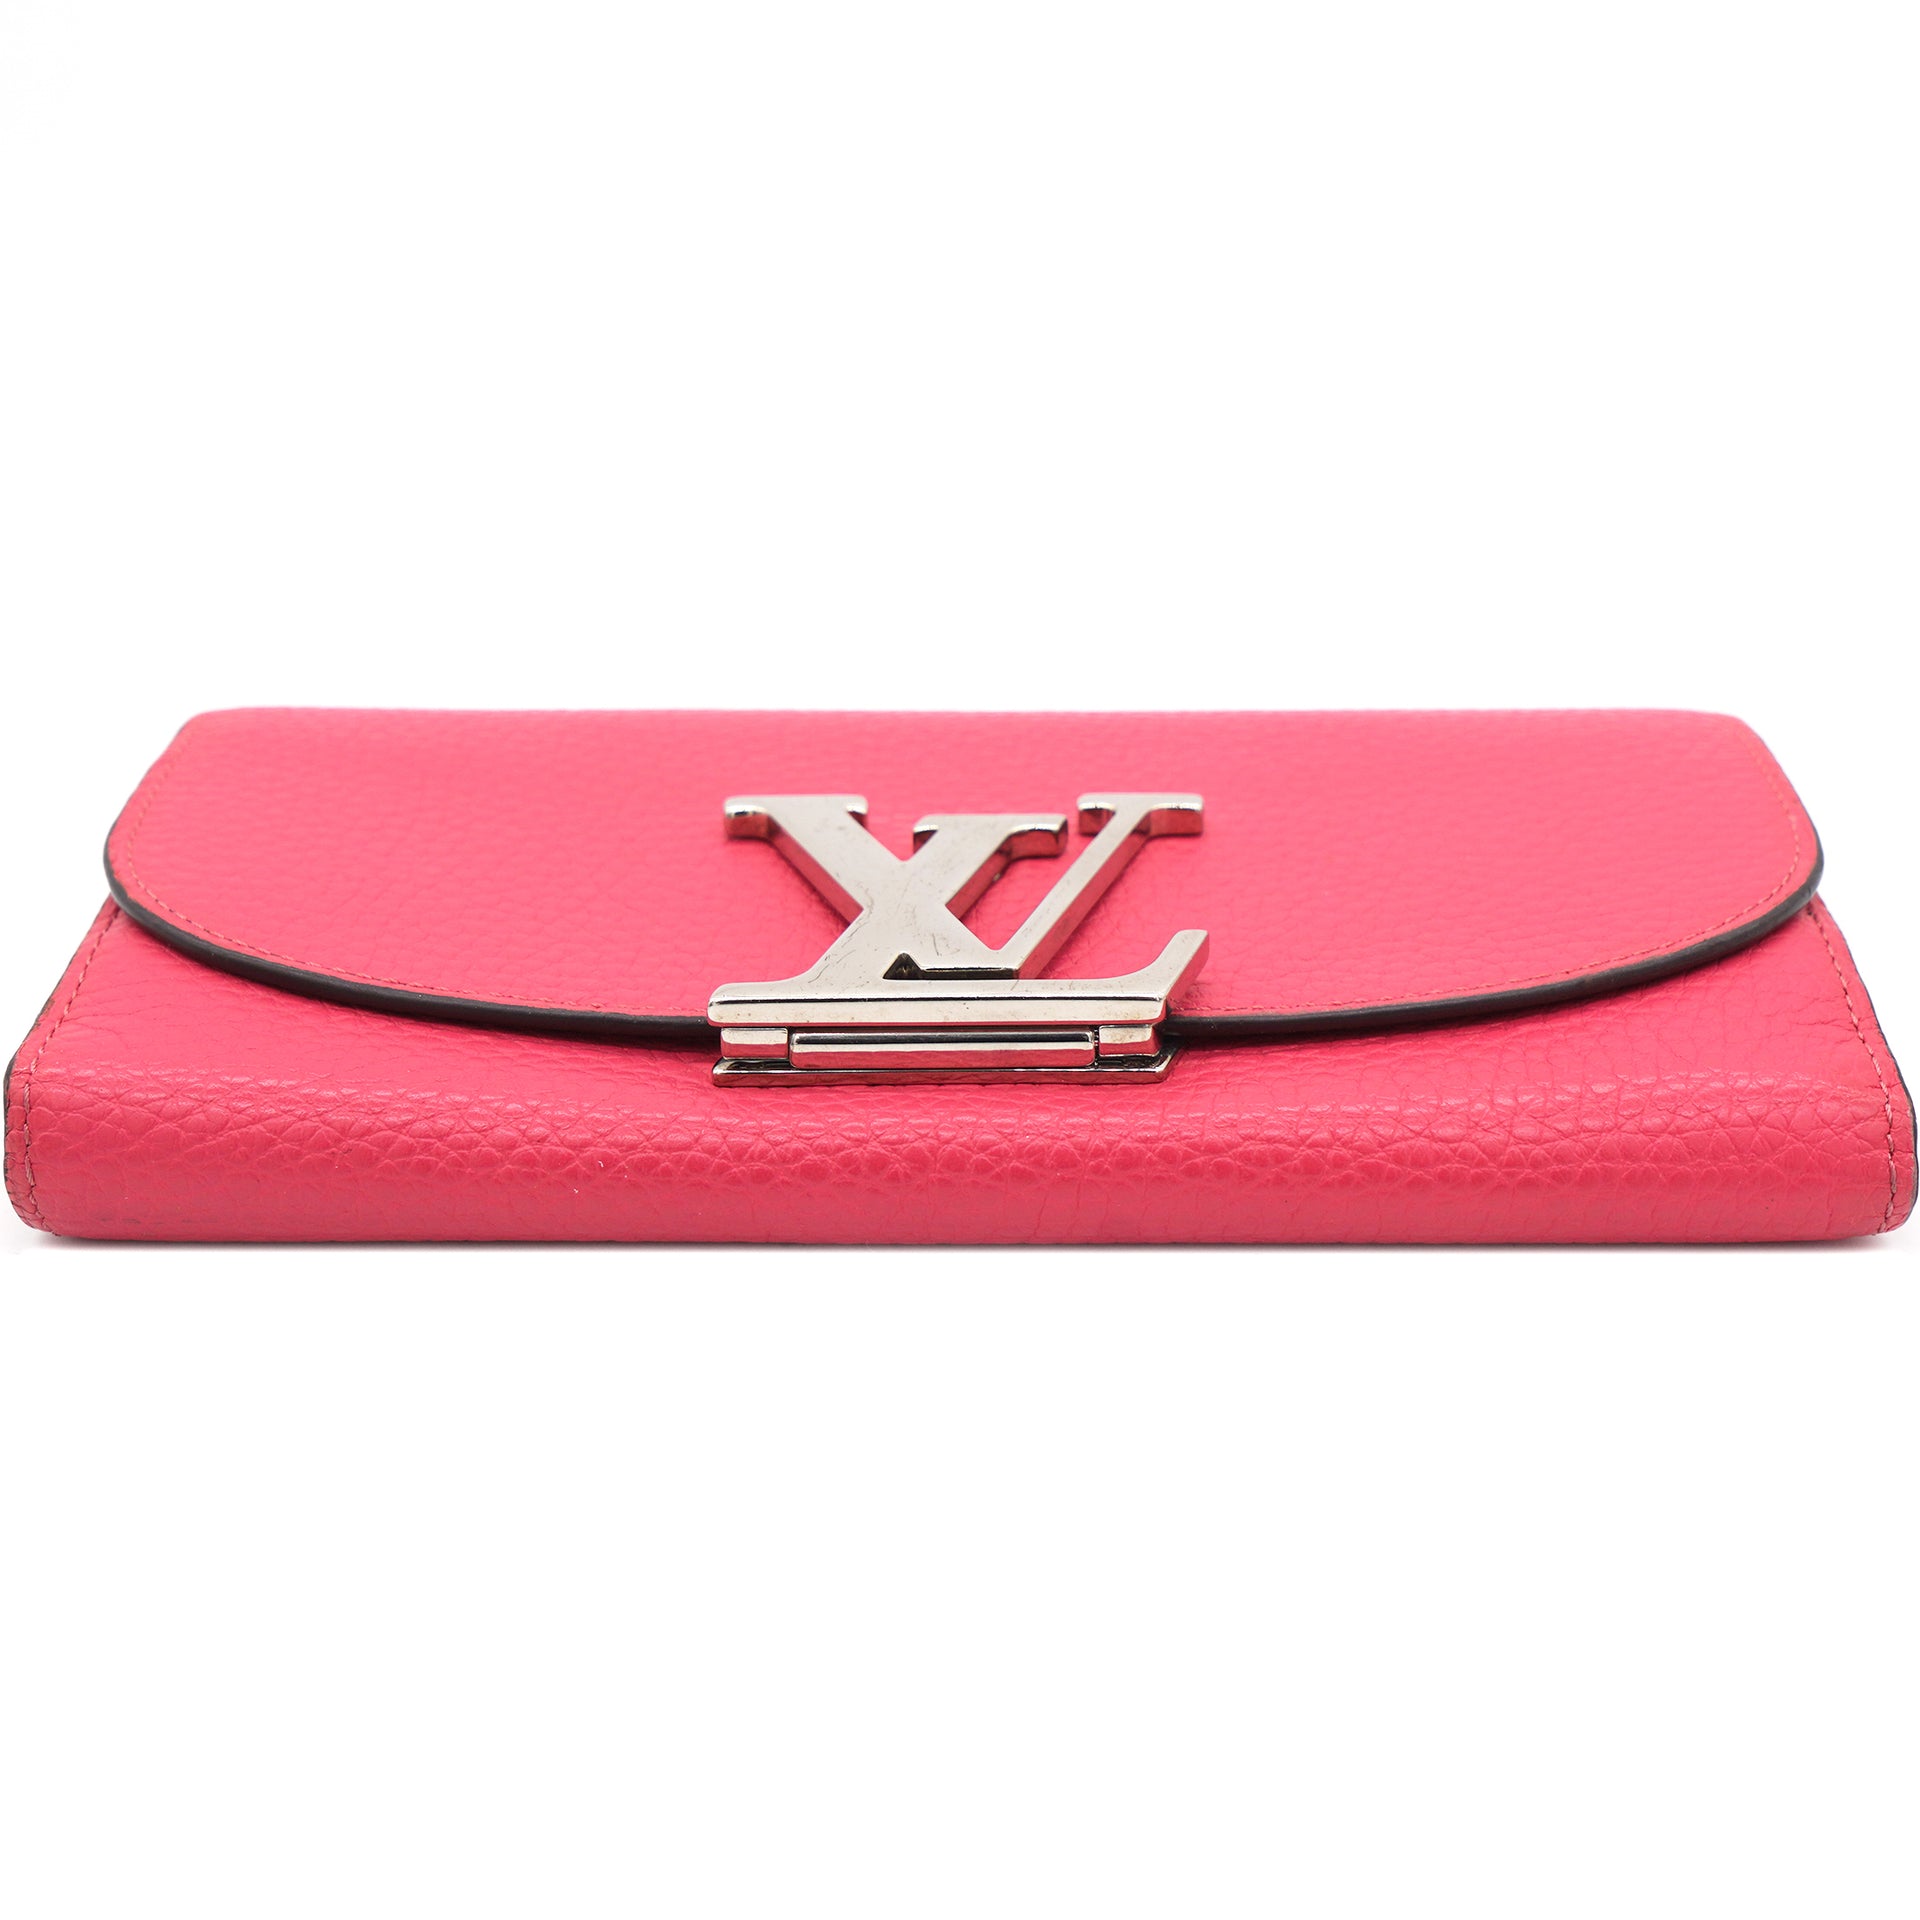 Taurillon Leather Vivienne LV Long Wallet Pink